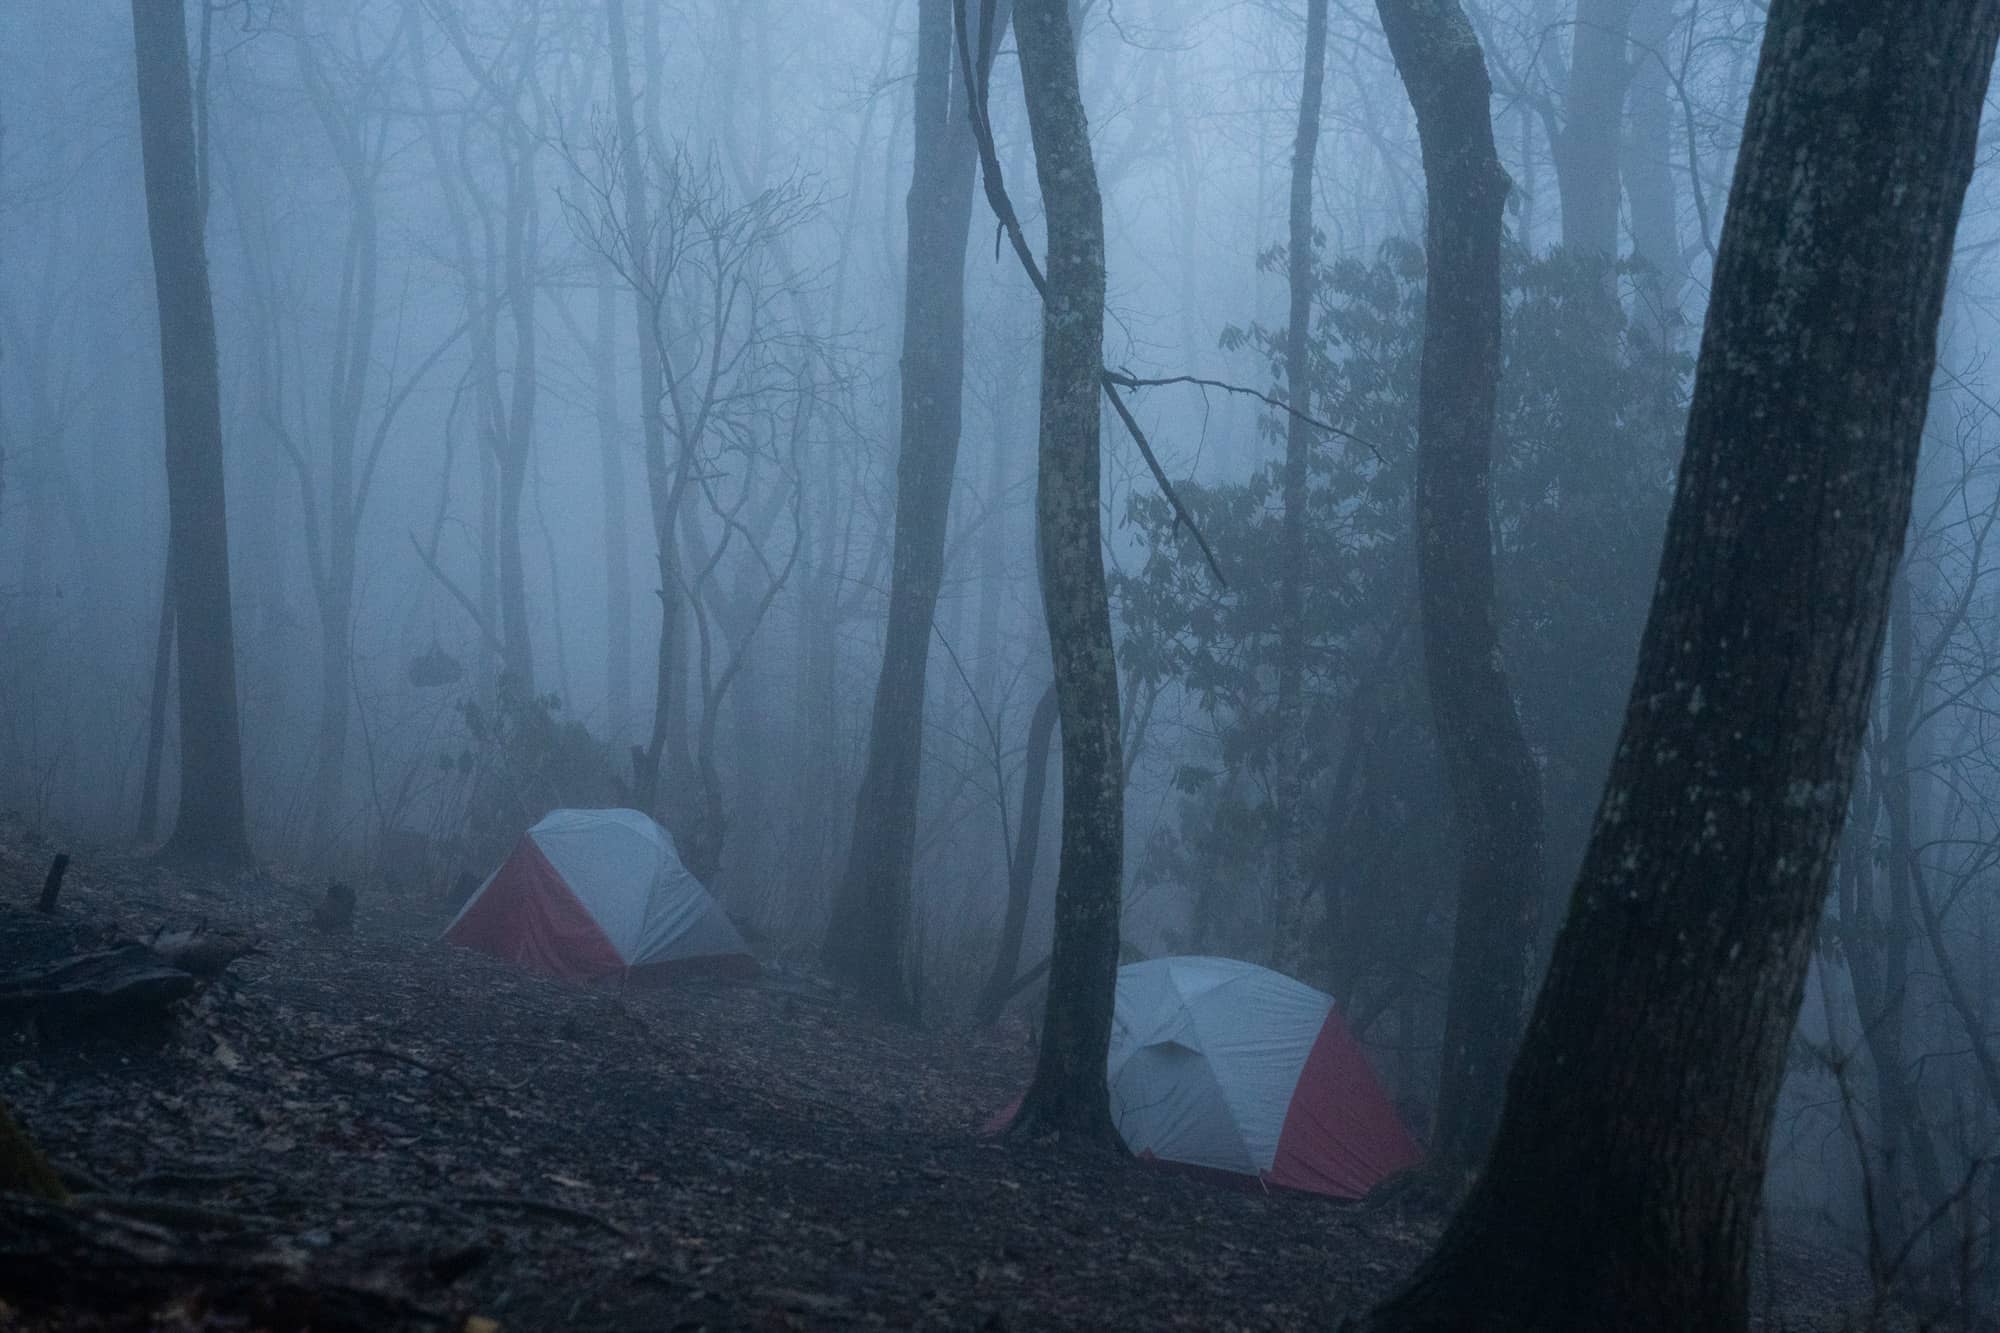 Ohio University tents stand tall in the rain during the fourth day backpacking a section of the Appalachian Trail in the Nantahala National Forest on Tuesday, March 8, 2022, at the Wayah Bald Shelter near Franklin, North Carolina.